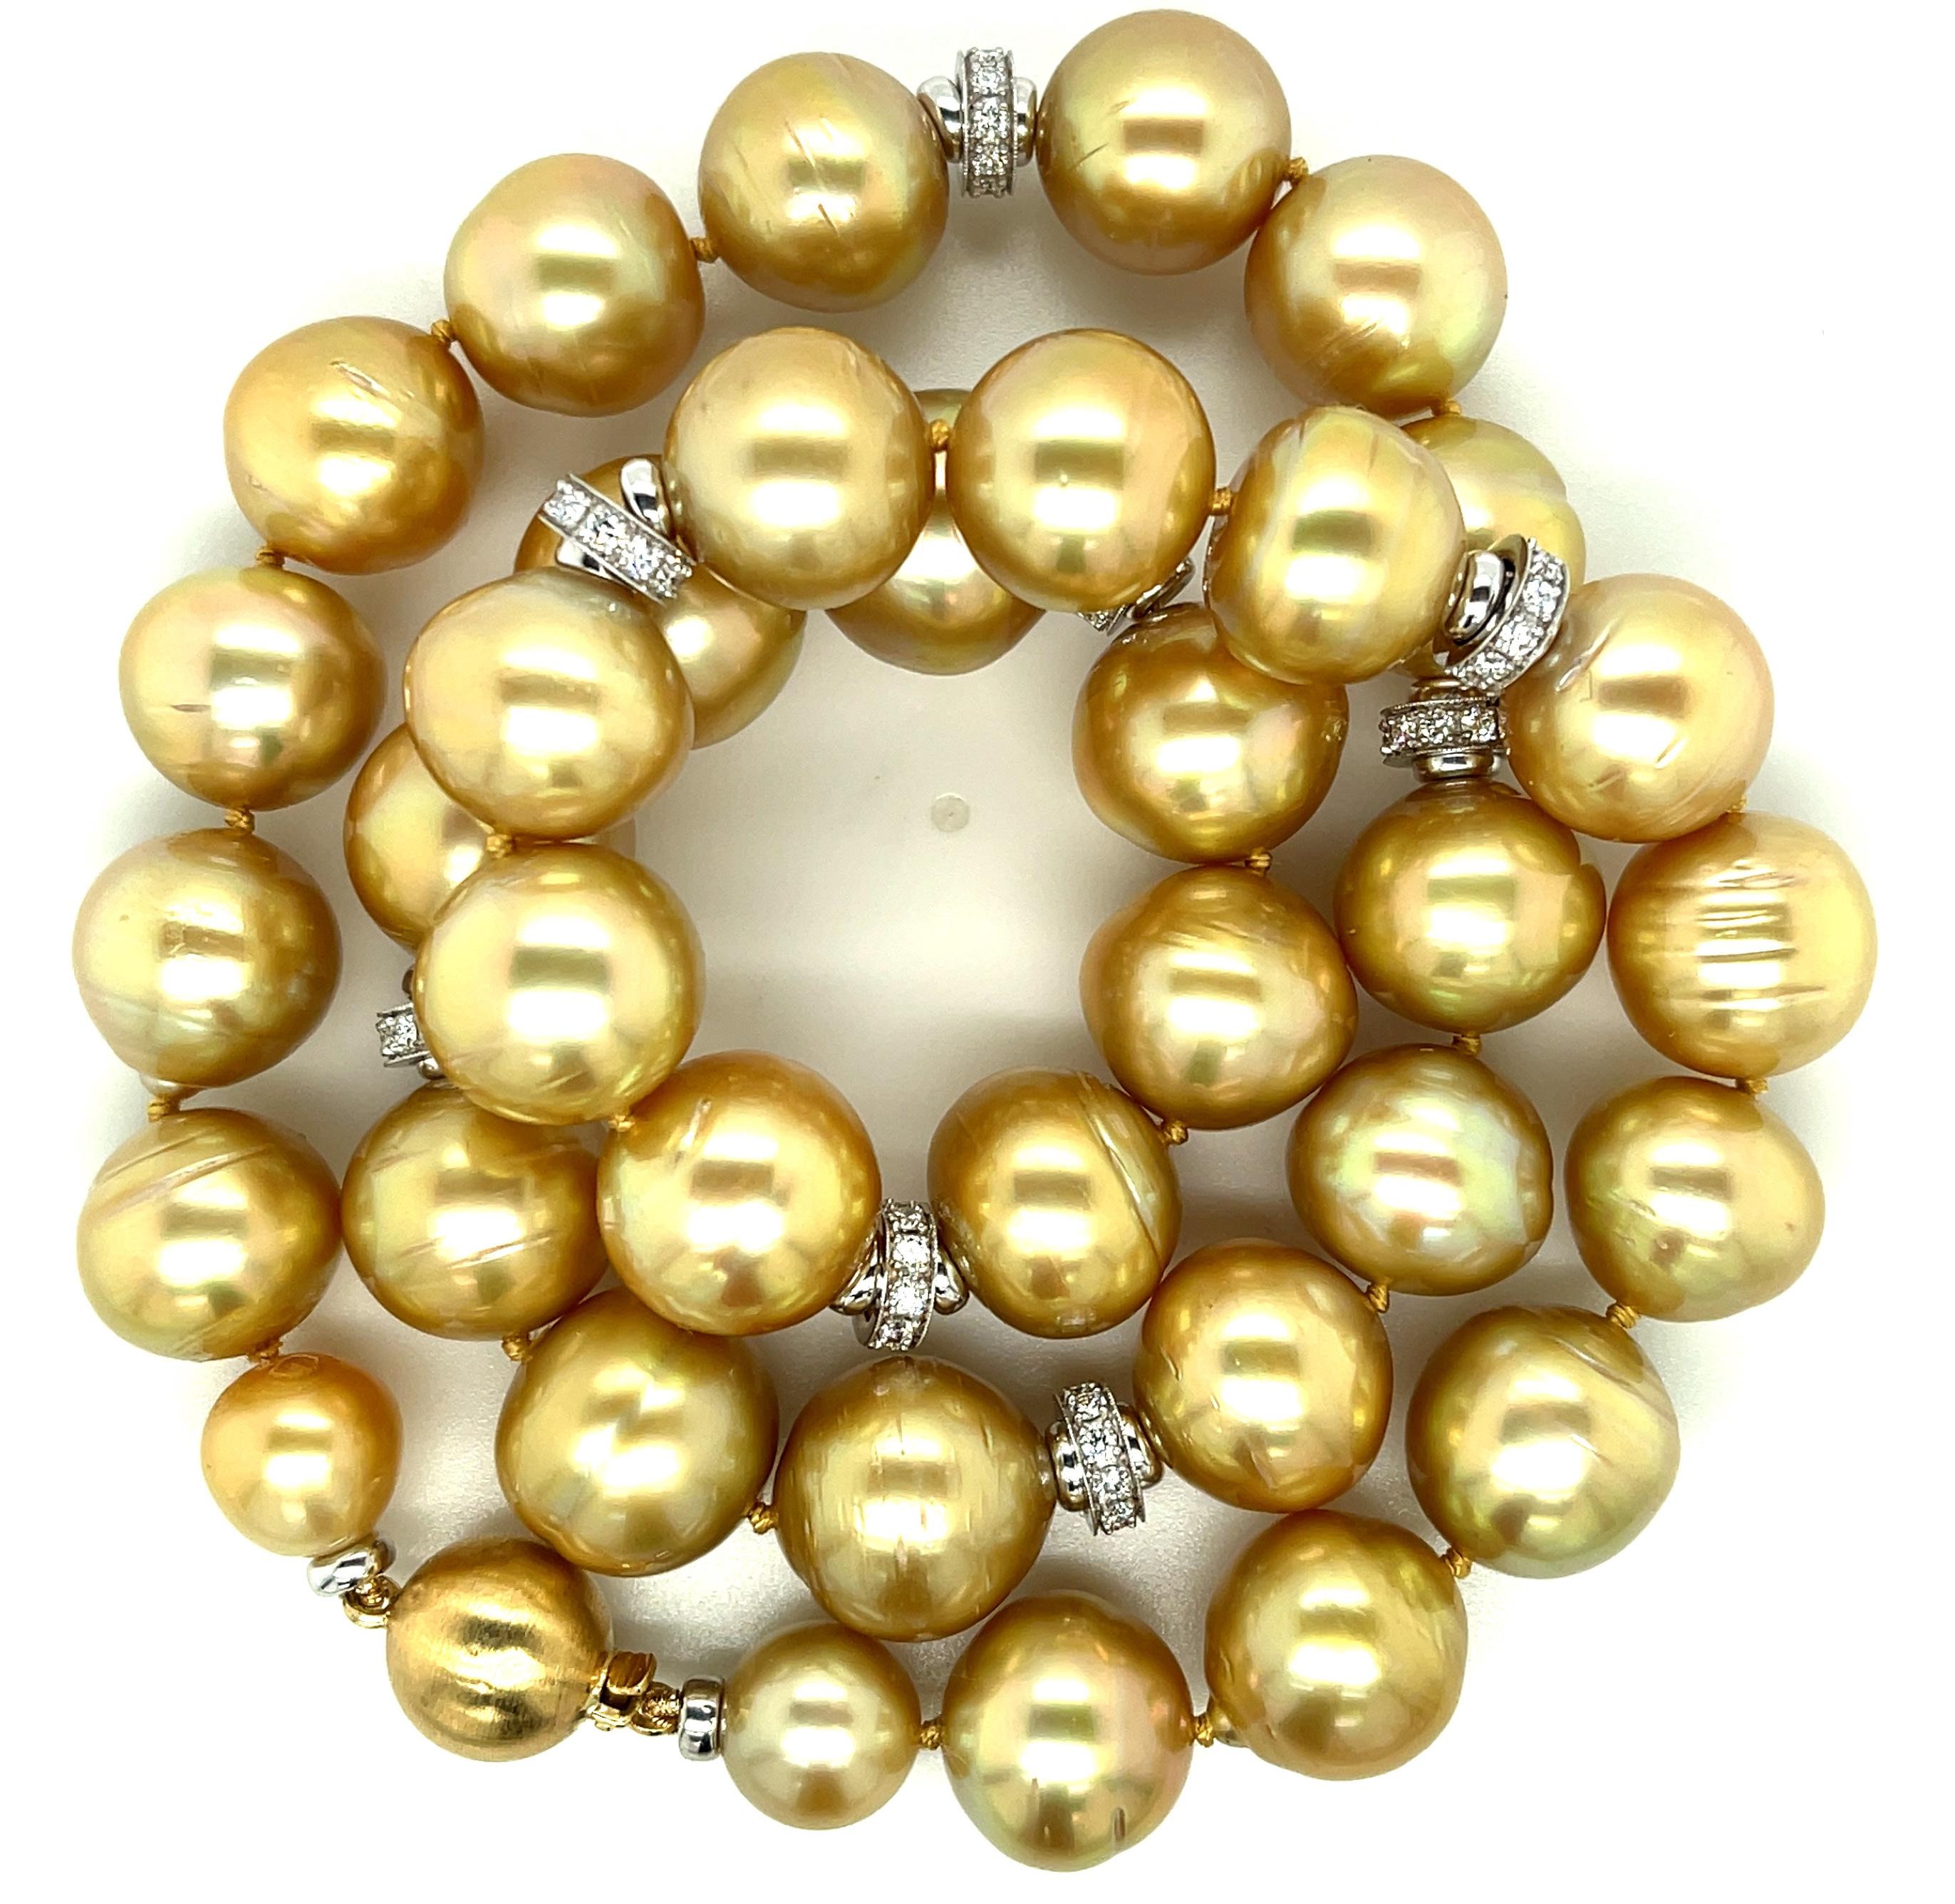 This exquisite strand of semi-baroque, roundish golden South Seas pearls is absolutely stunning!  Included are 35 gorgeous pearls graduating in diameter from 10.00mm to 15.00mm, all with superior luster. They have been hand strung on golden silk